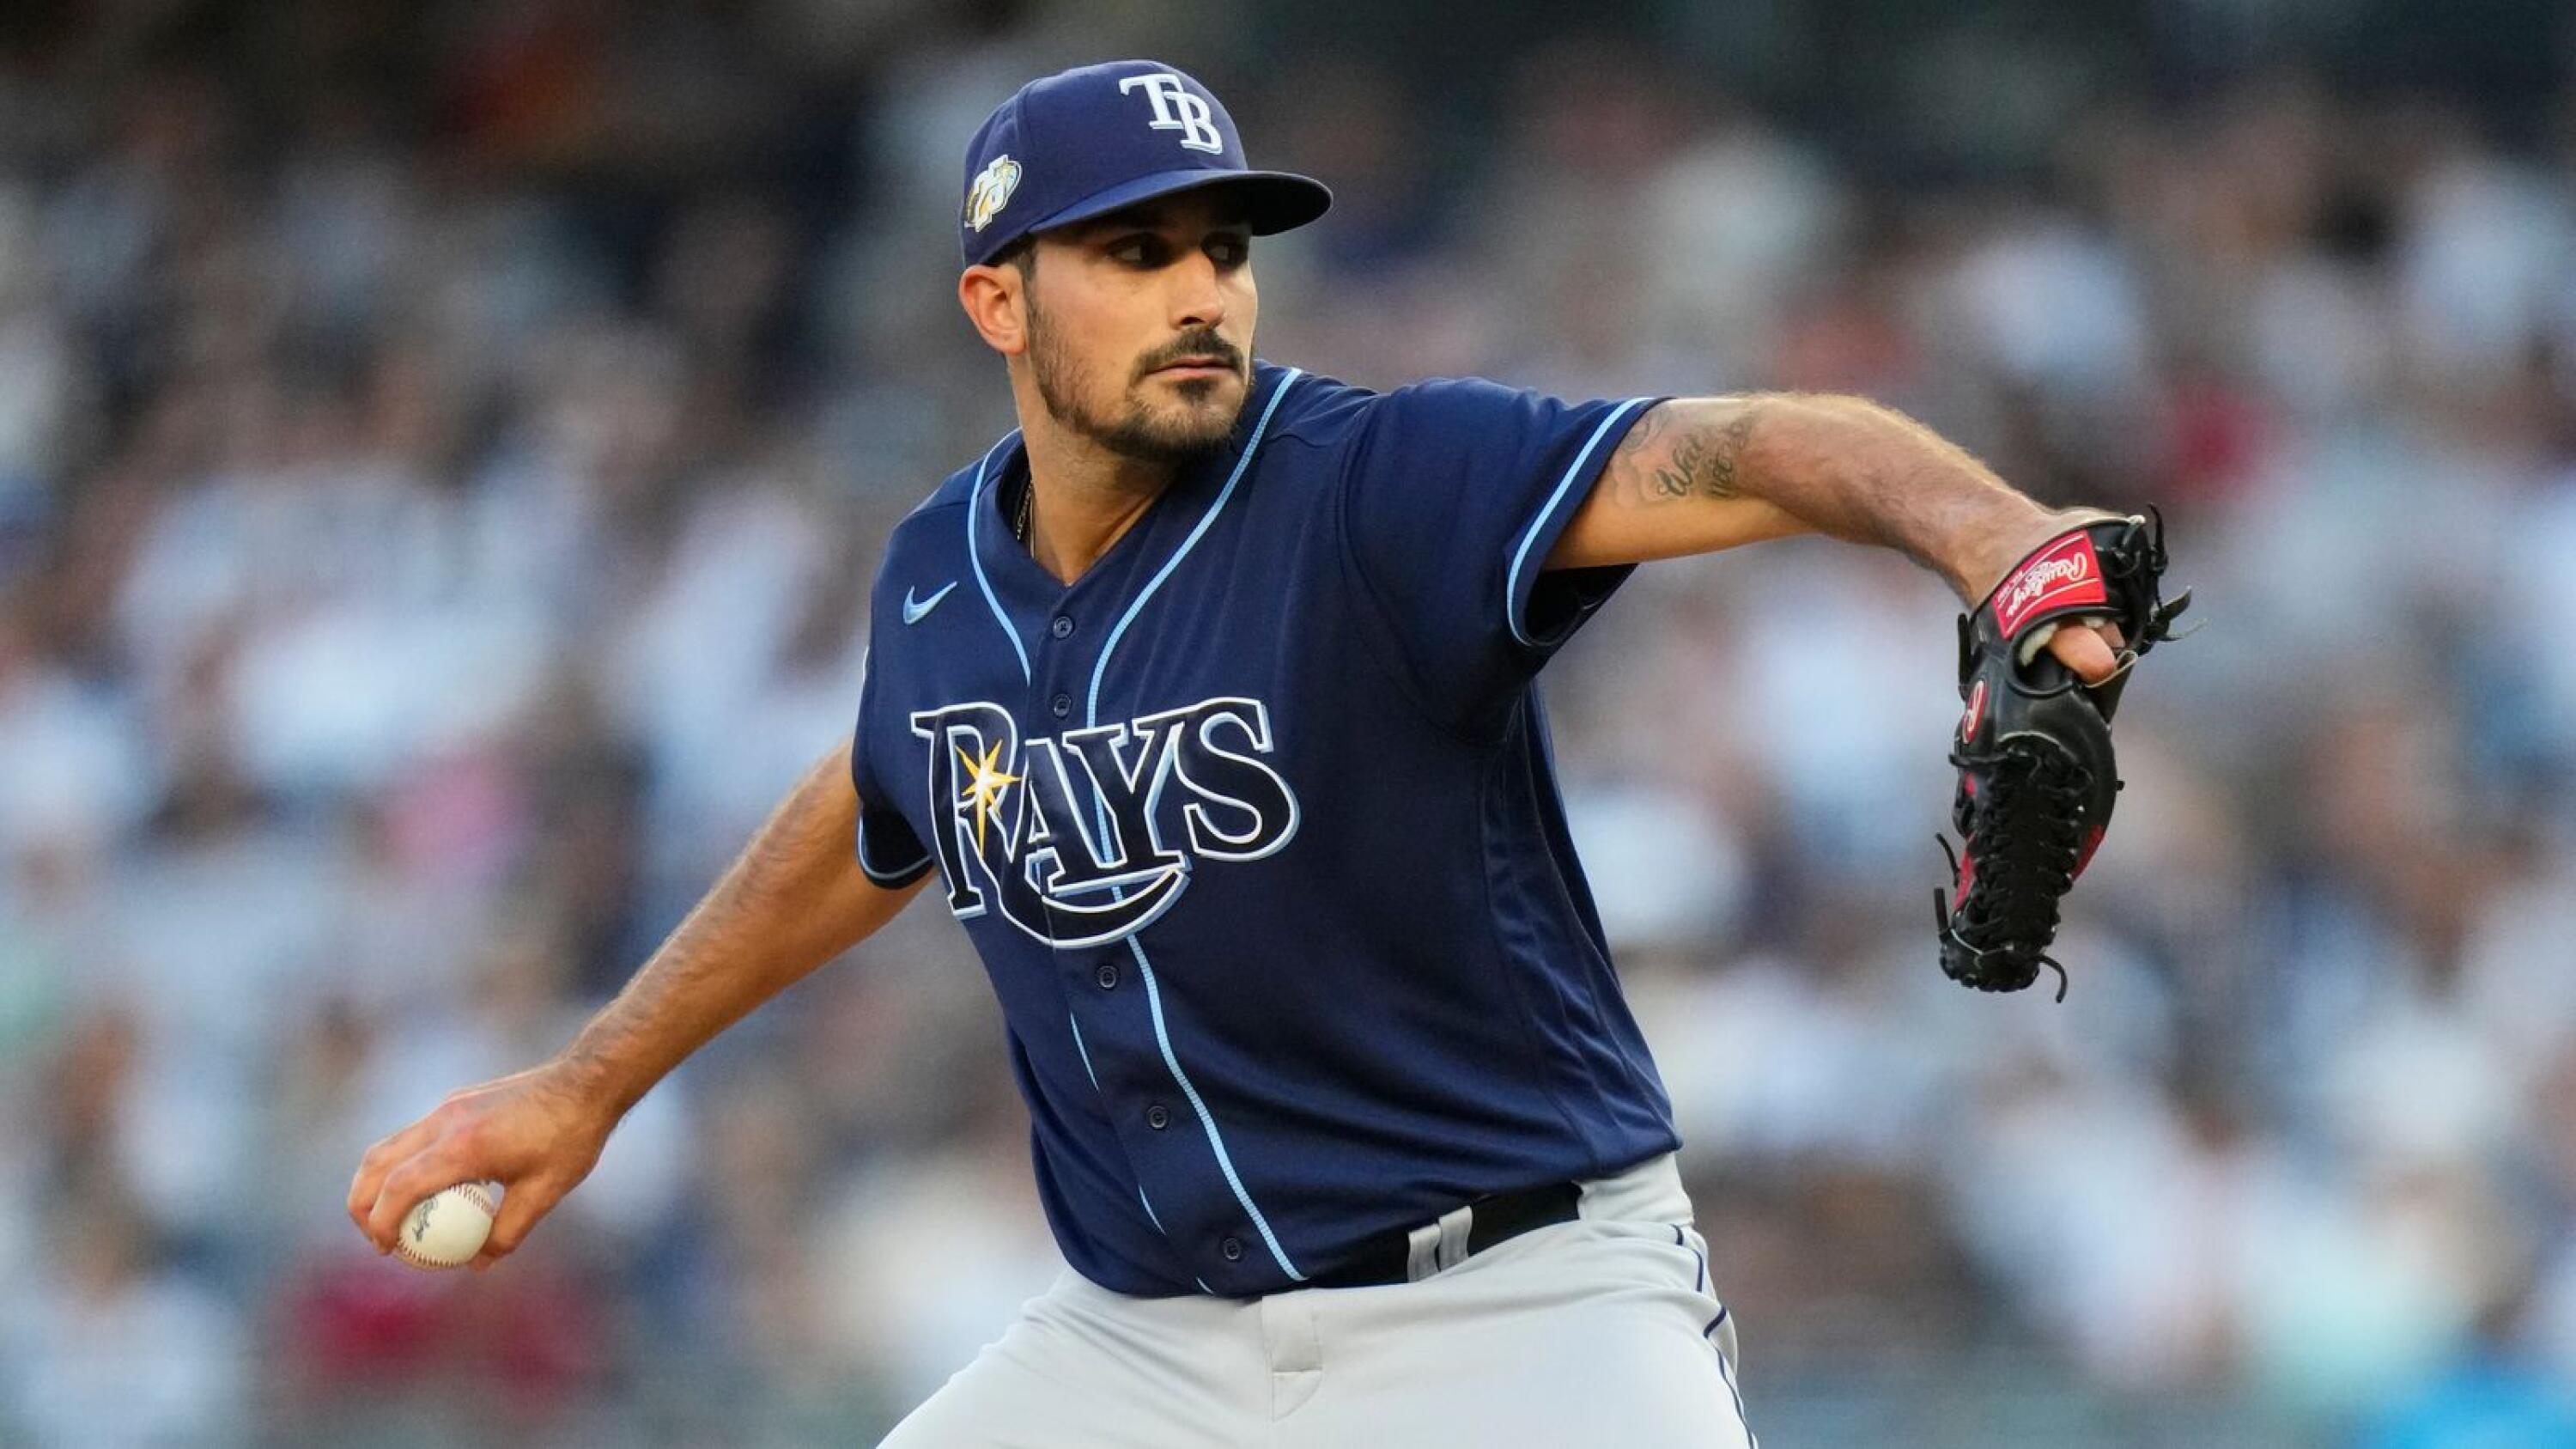 Eflin earns his 12th win as the Rays beat the Yankees 5-2